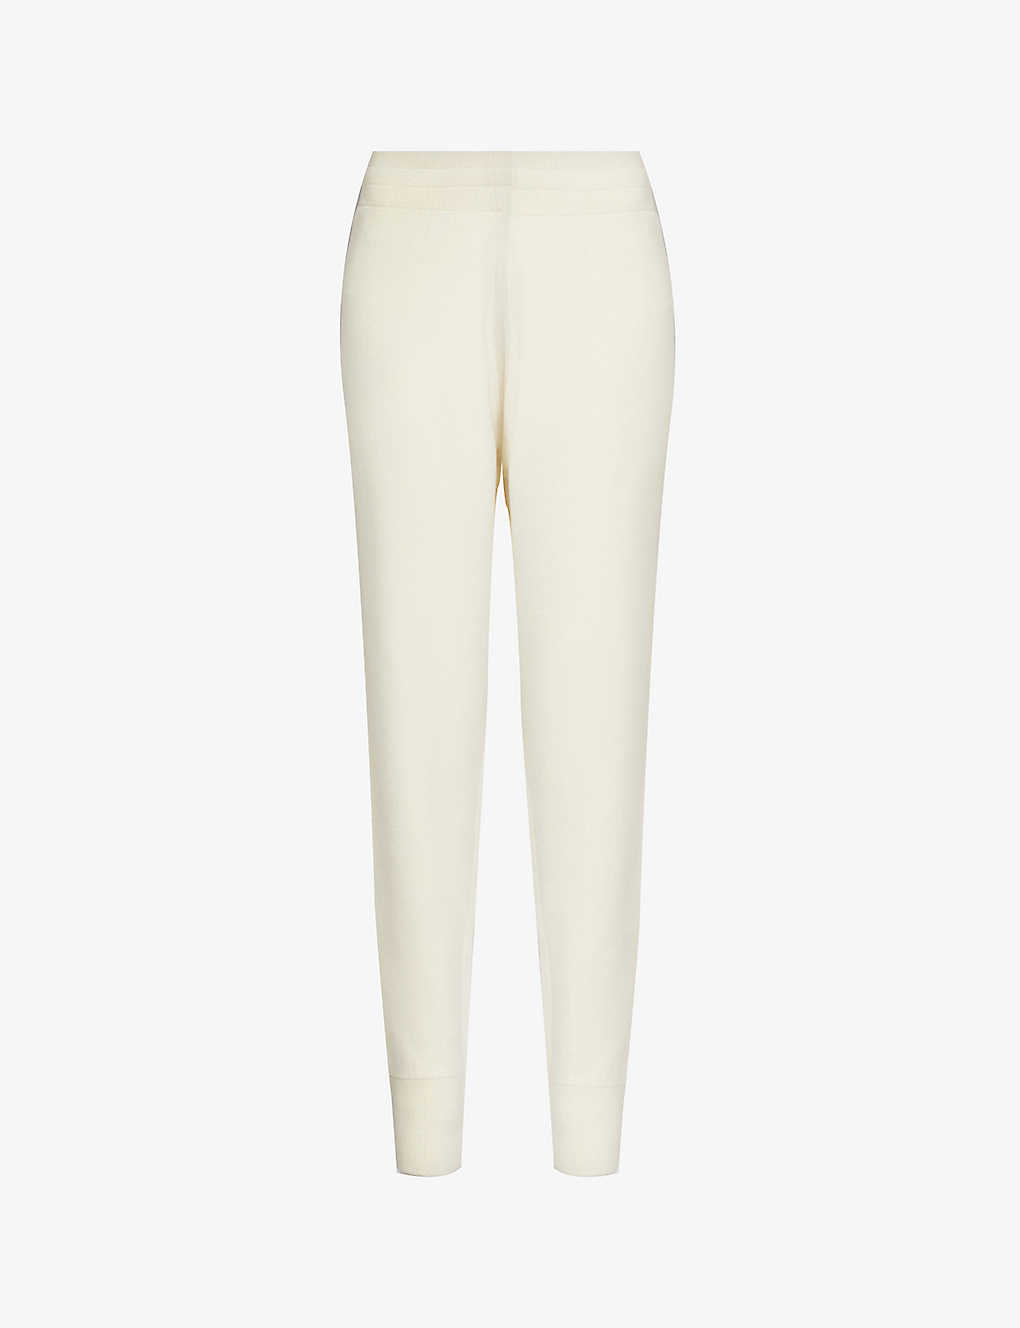 Varley Kent Knitted Track Pants In Cream